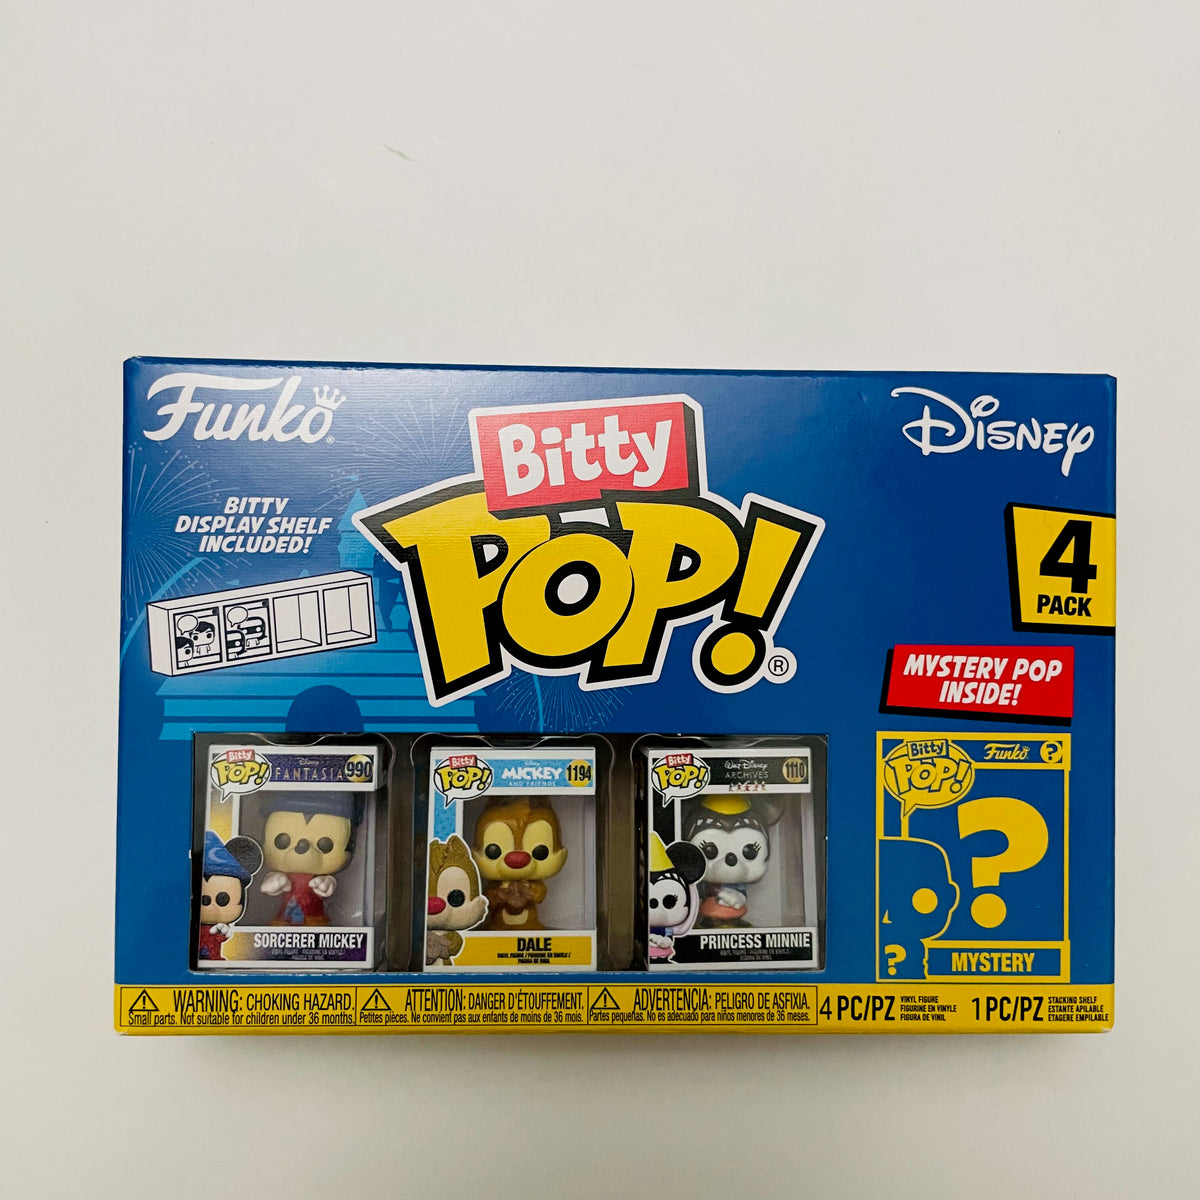 Funko Bitty Pop! Disney 4 Pack Sorcerer Mickey Dale Princess Minnie and  Mystery - We-R-Toys